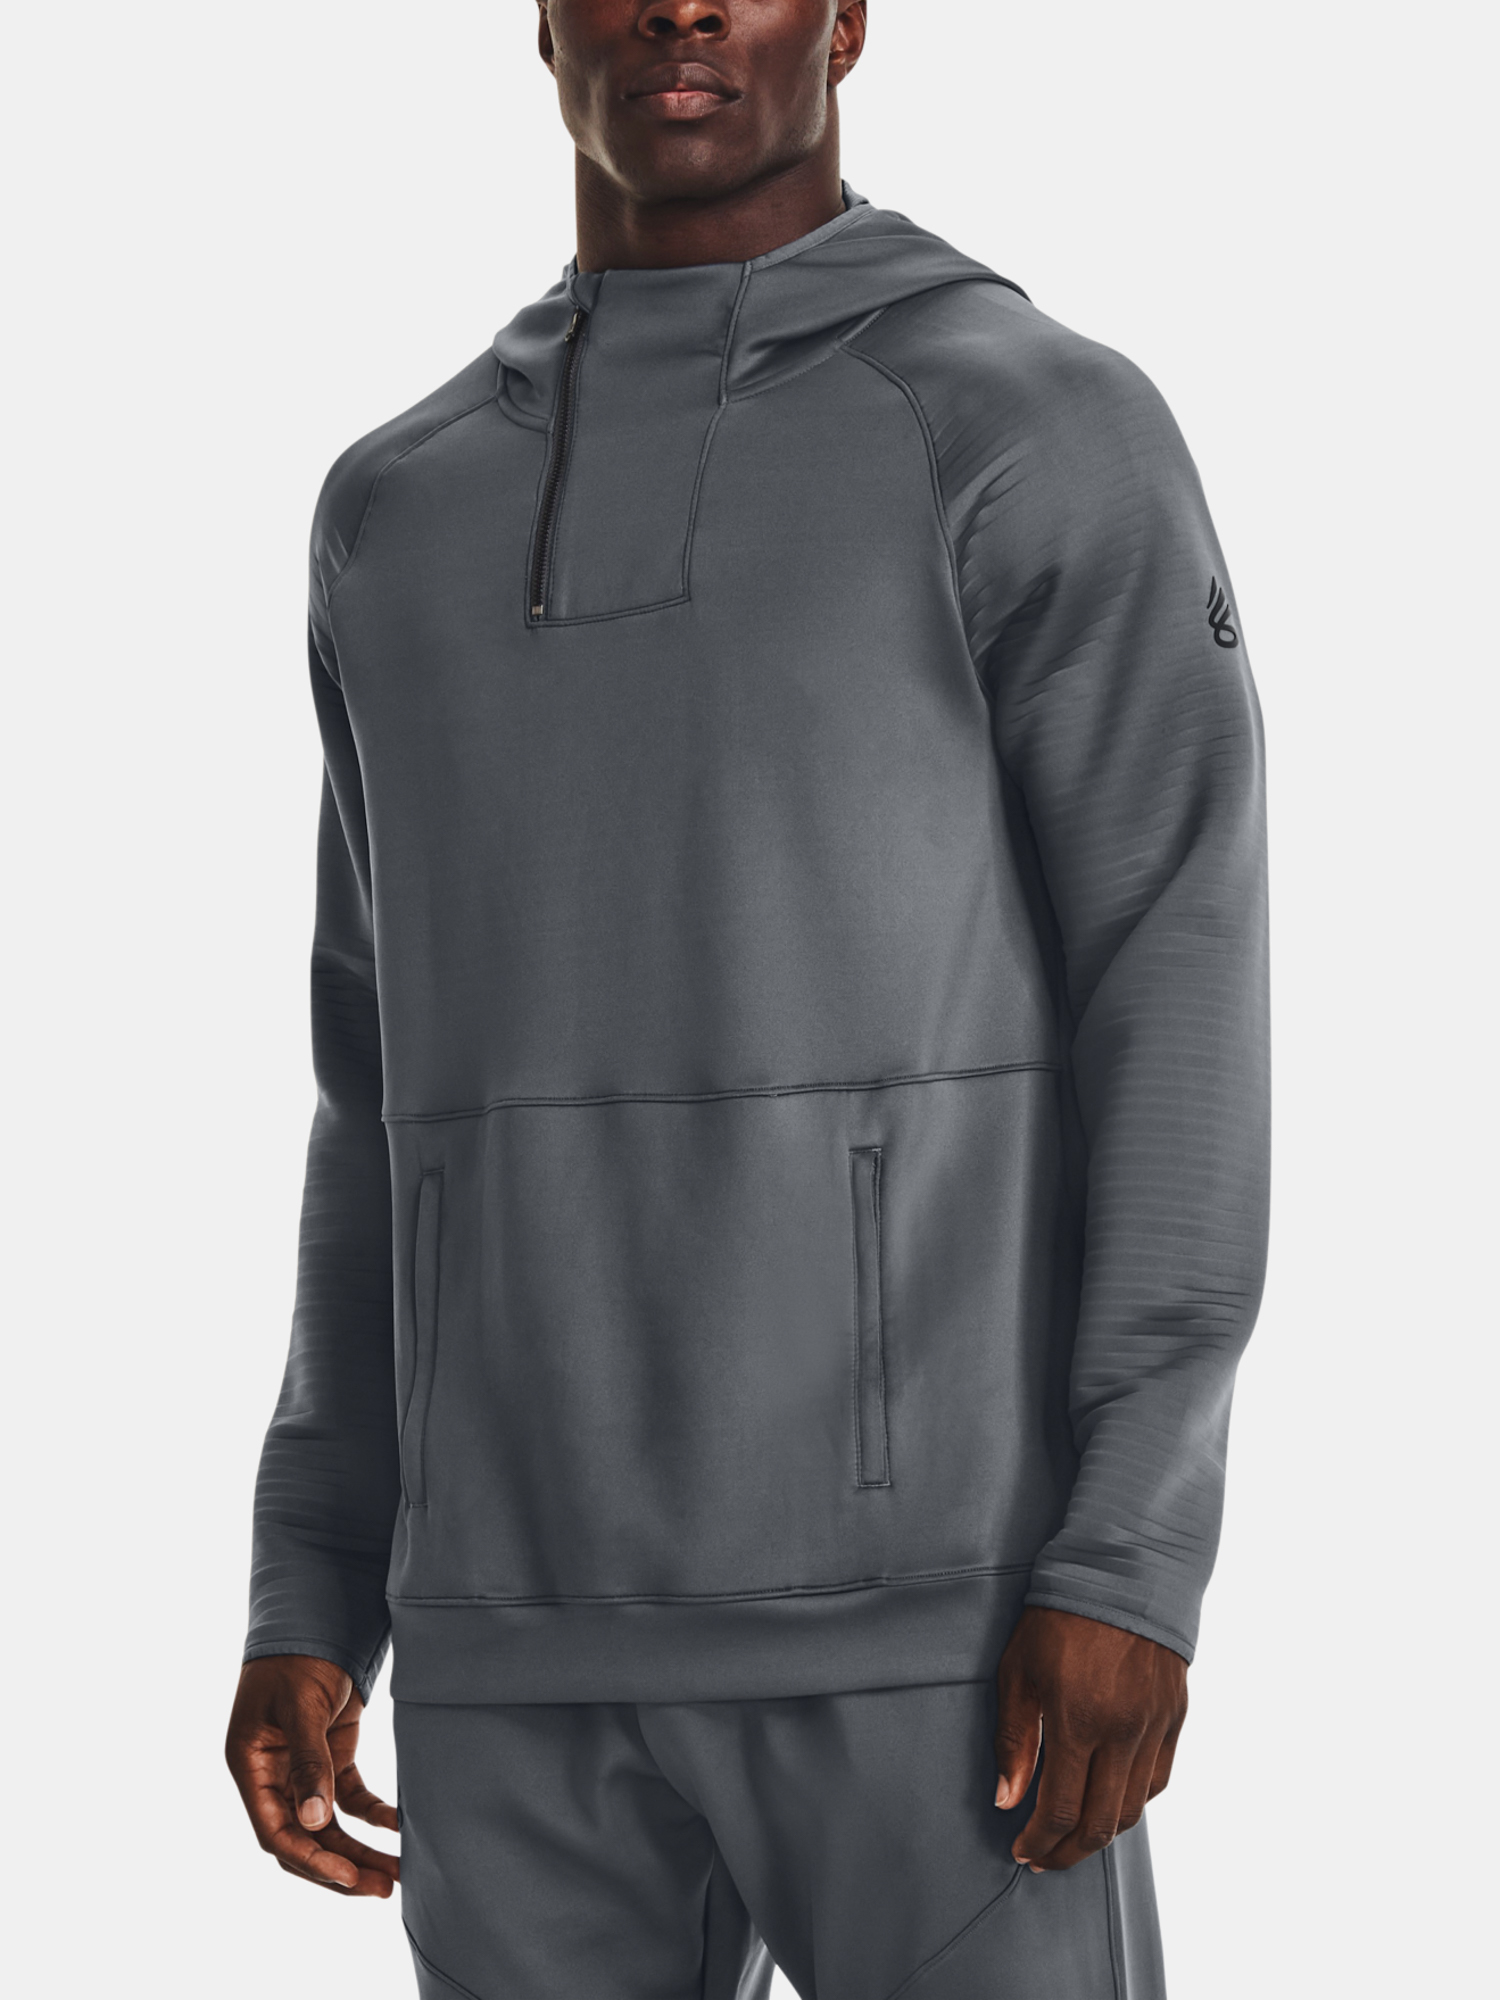 Under Armour Curry Playable Jacket-GRY - Men's